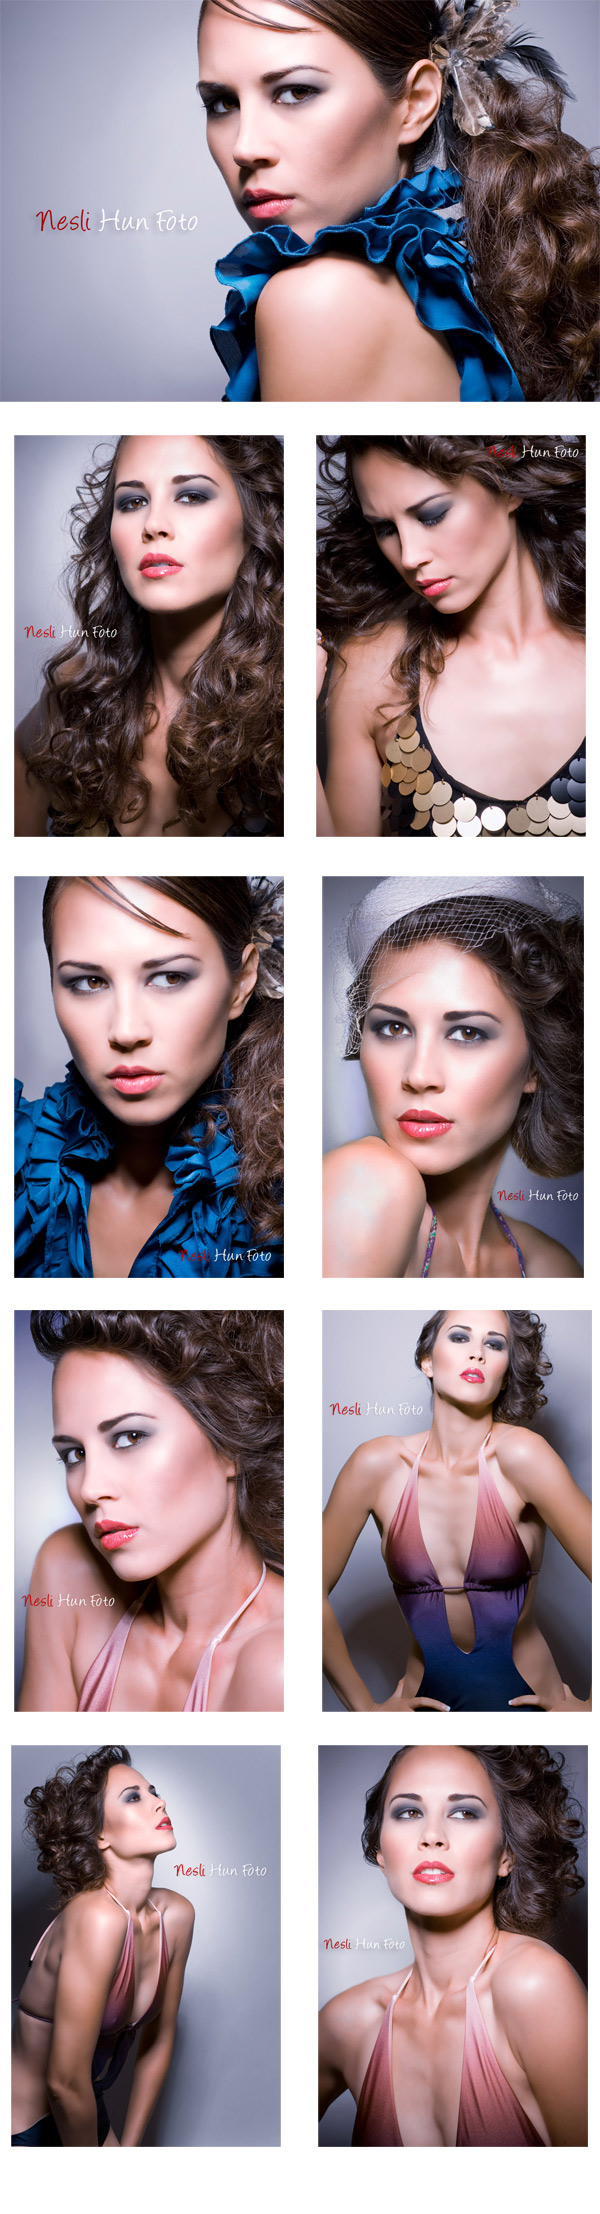 Female model photo shoot of Nesli Hun Foto and Catarina B in Oceanside, makeup by julie taing 